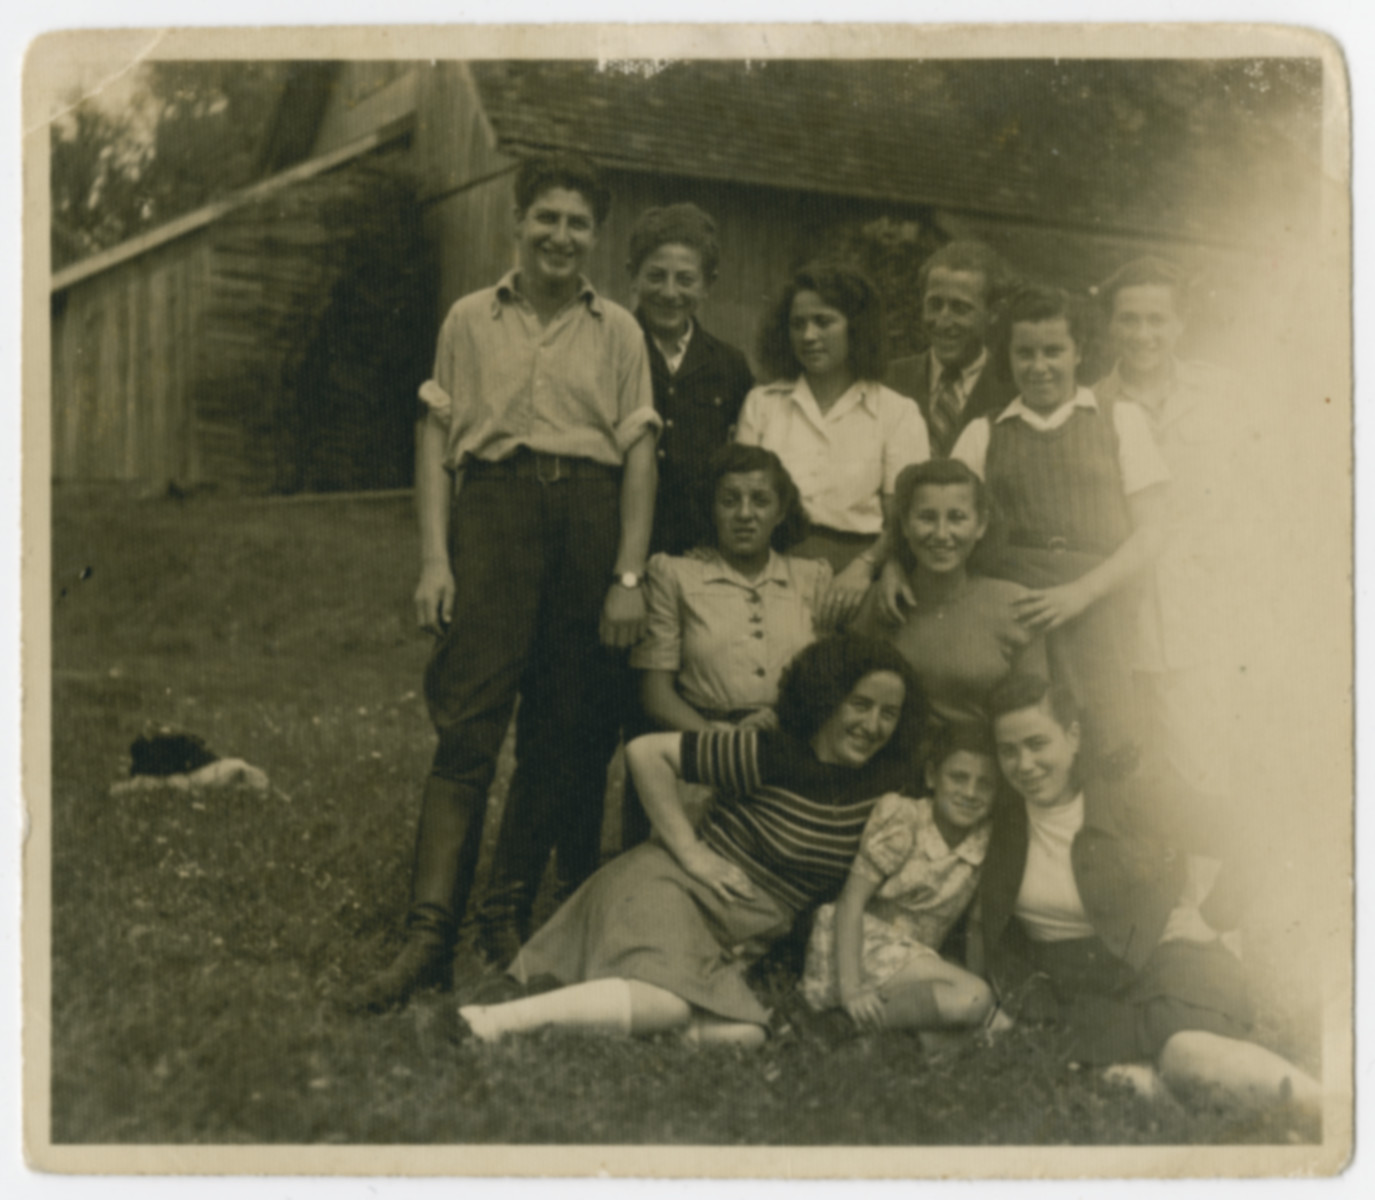 Group portrait of young people in the Holzhausen kibbutz hachshara.

Rifka Weiss is pictured seated in the front right.  Rochel is seated on the front left.